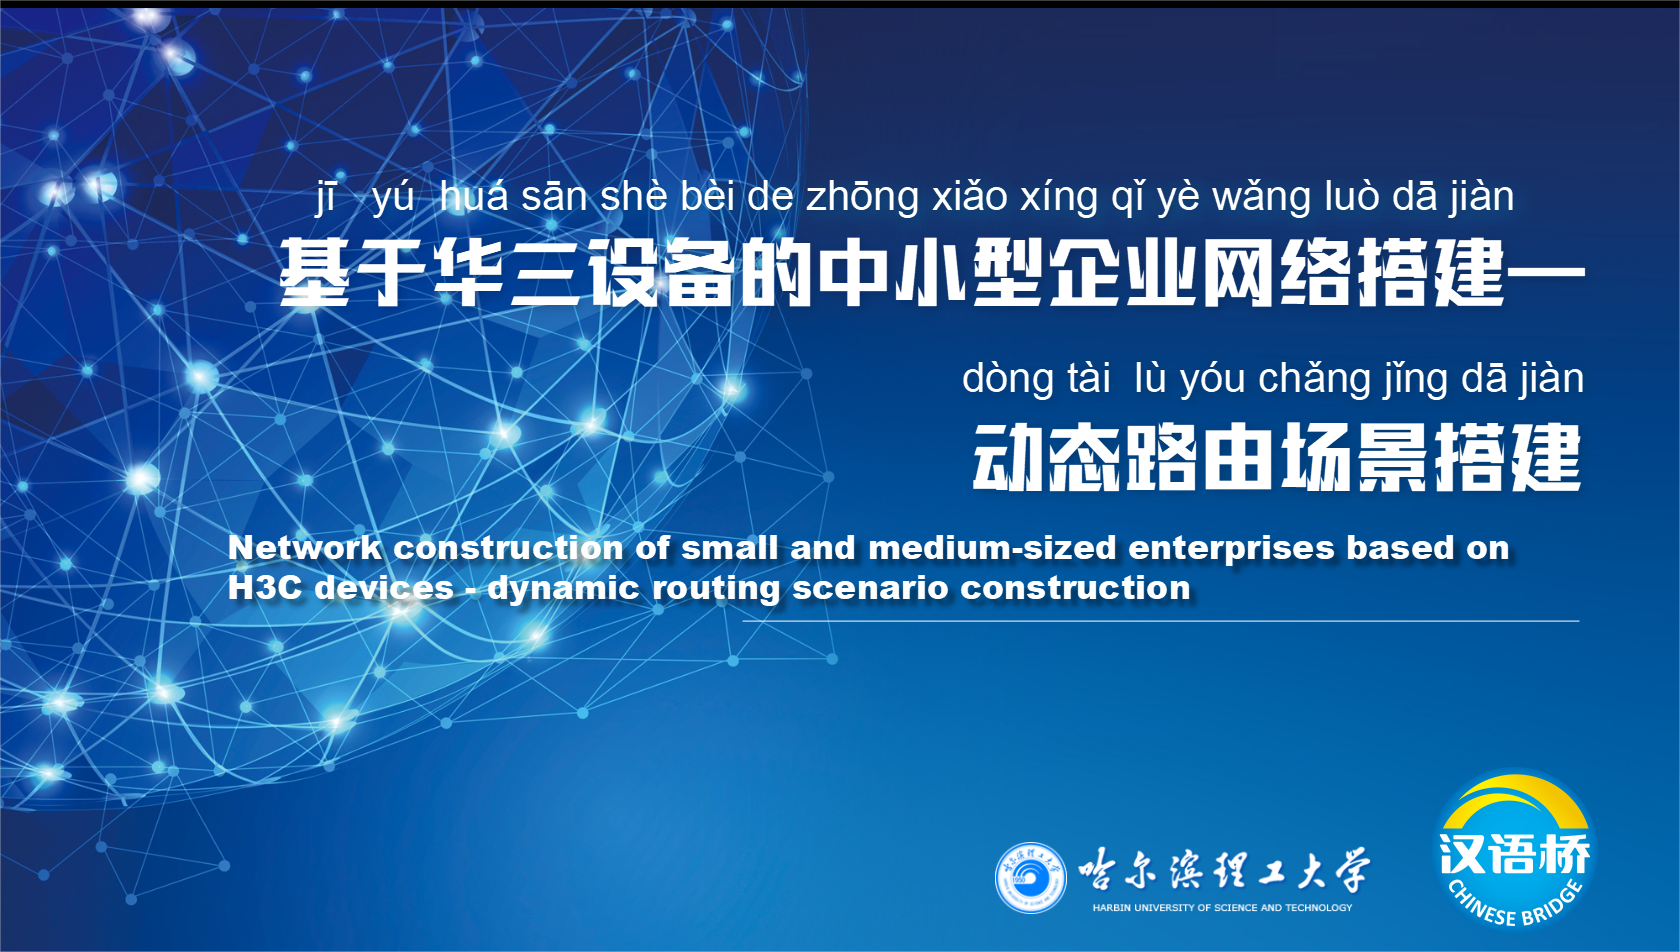 Network construction of small and medium-sized enterprises based on H3C devices - Dynamic routing scenario construction